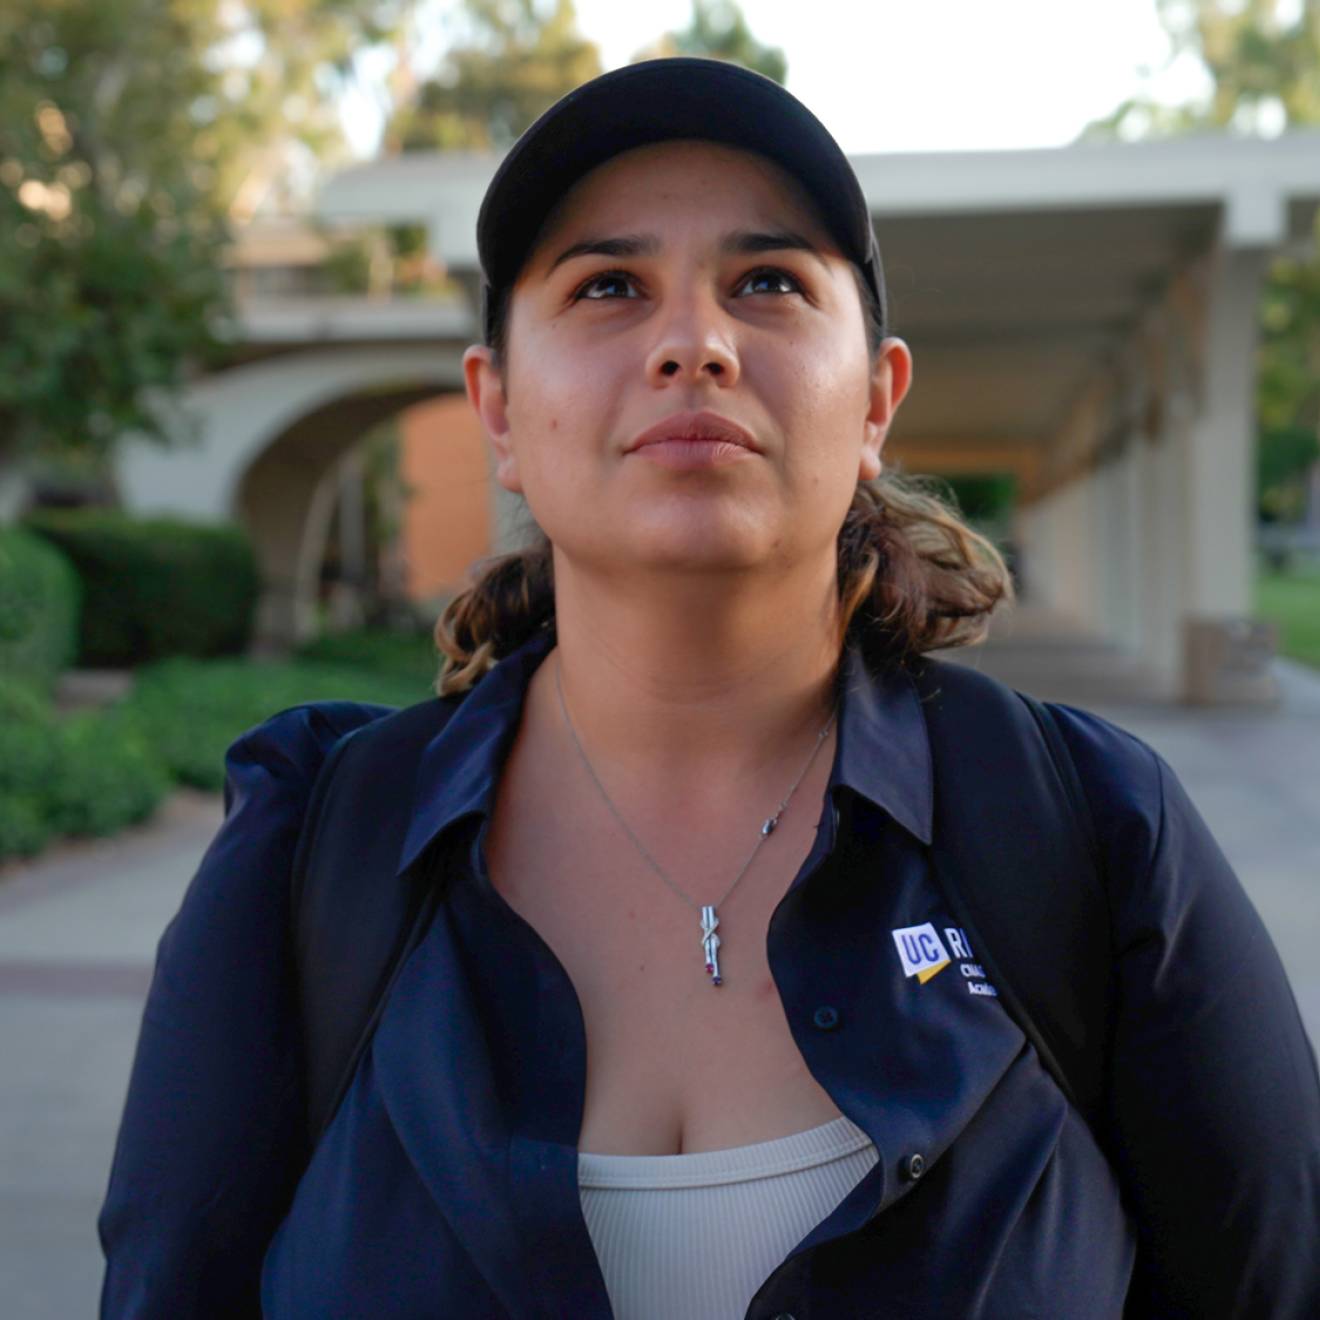 A woman wearing a baseball cap and walking on the UC Riverside campus looks up